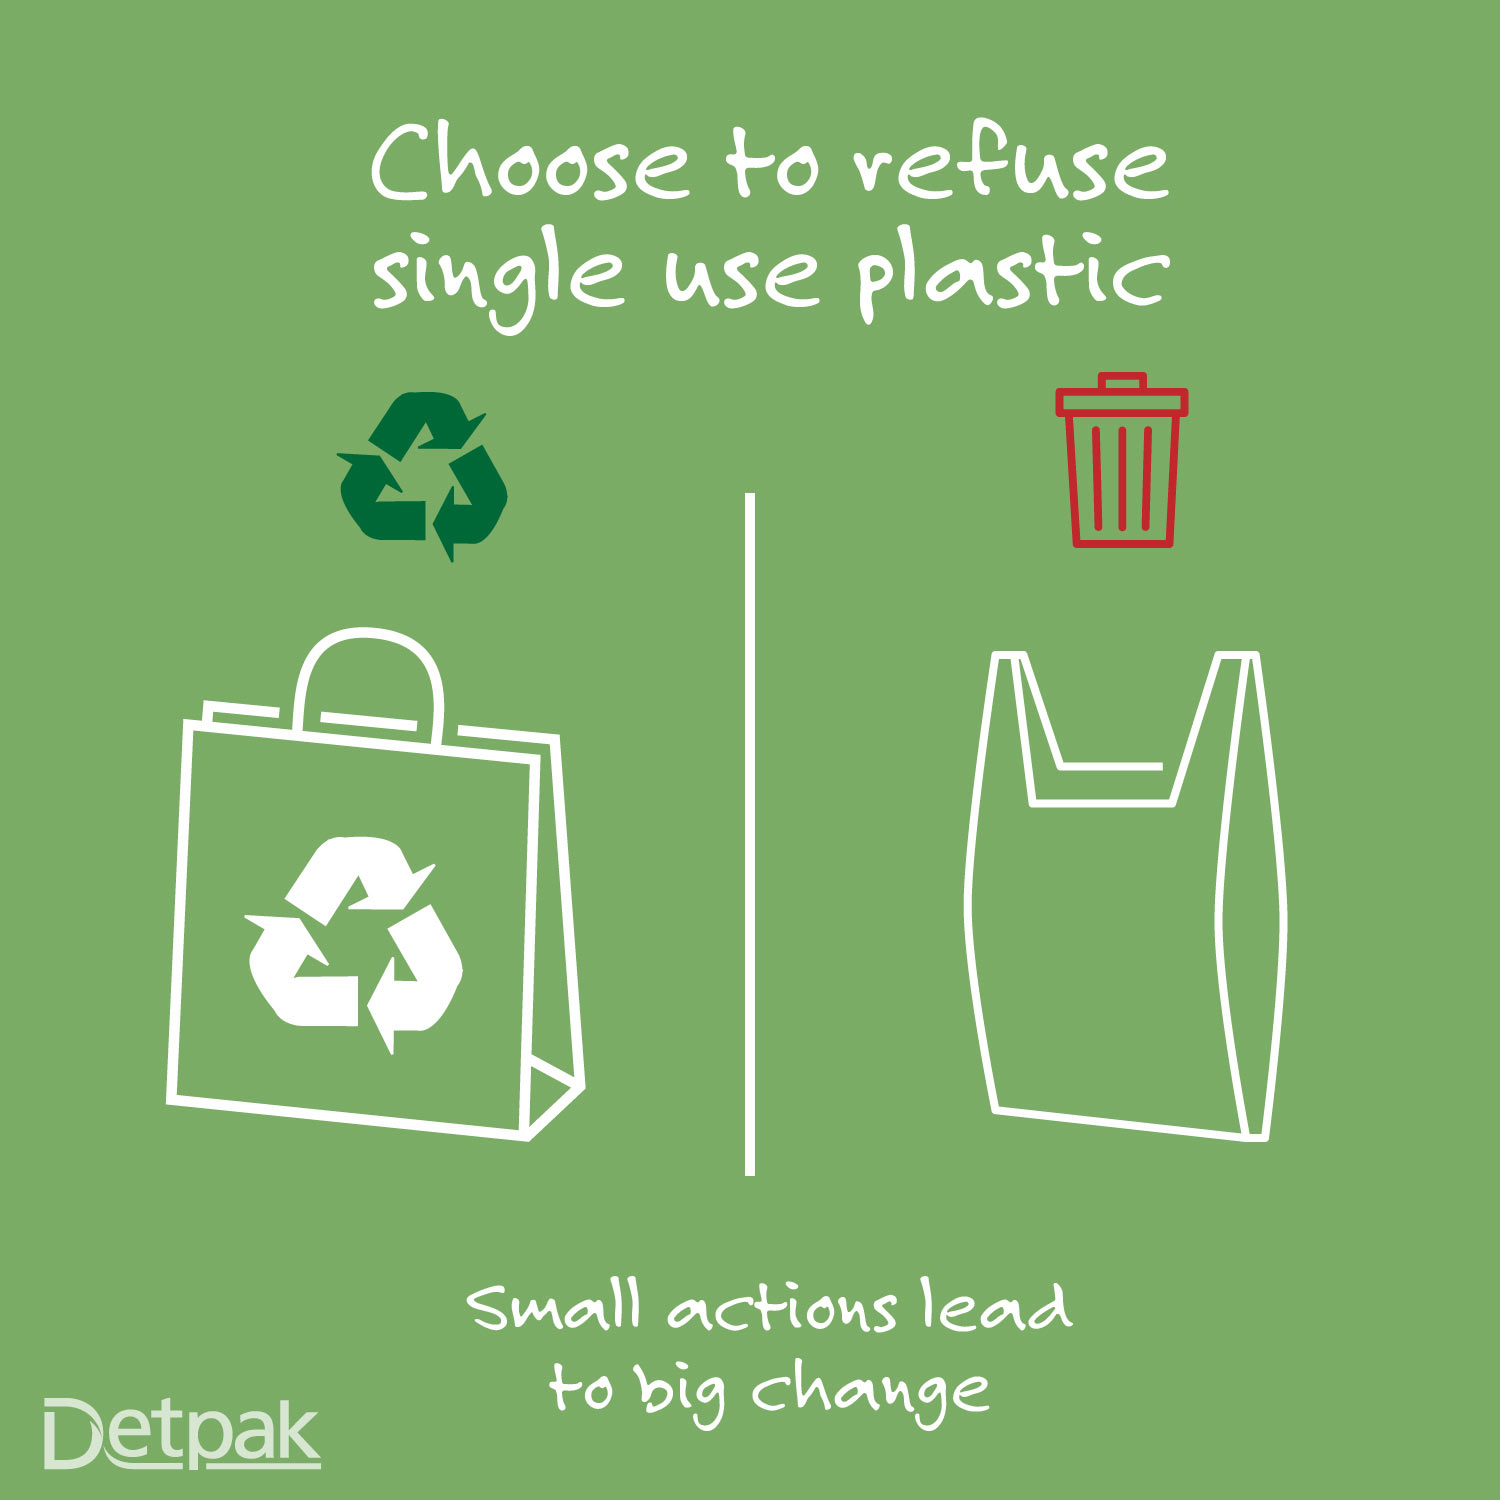 Your small actions lead to big change - choose to refuse single use plastic bags and choose a sustainable paper alternative